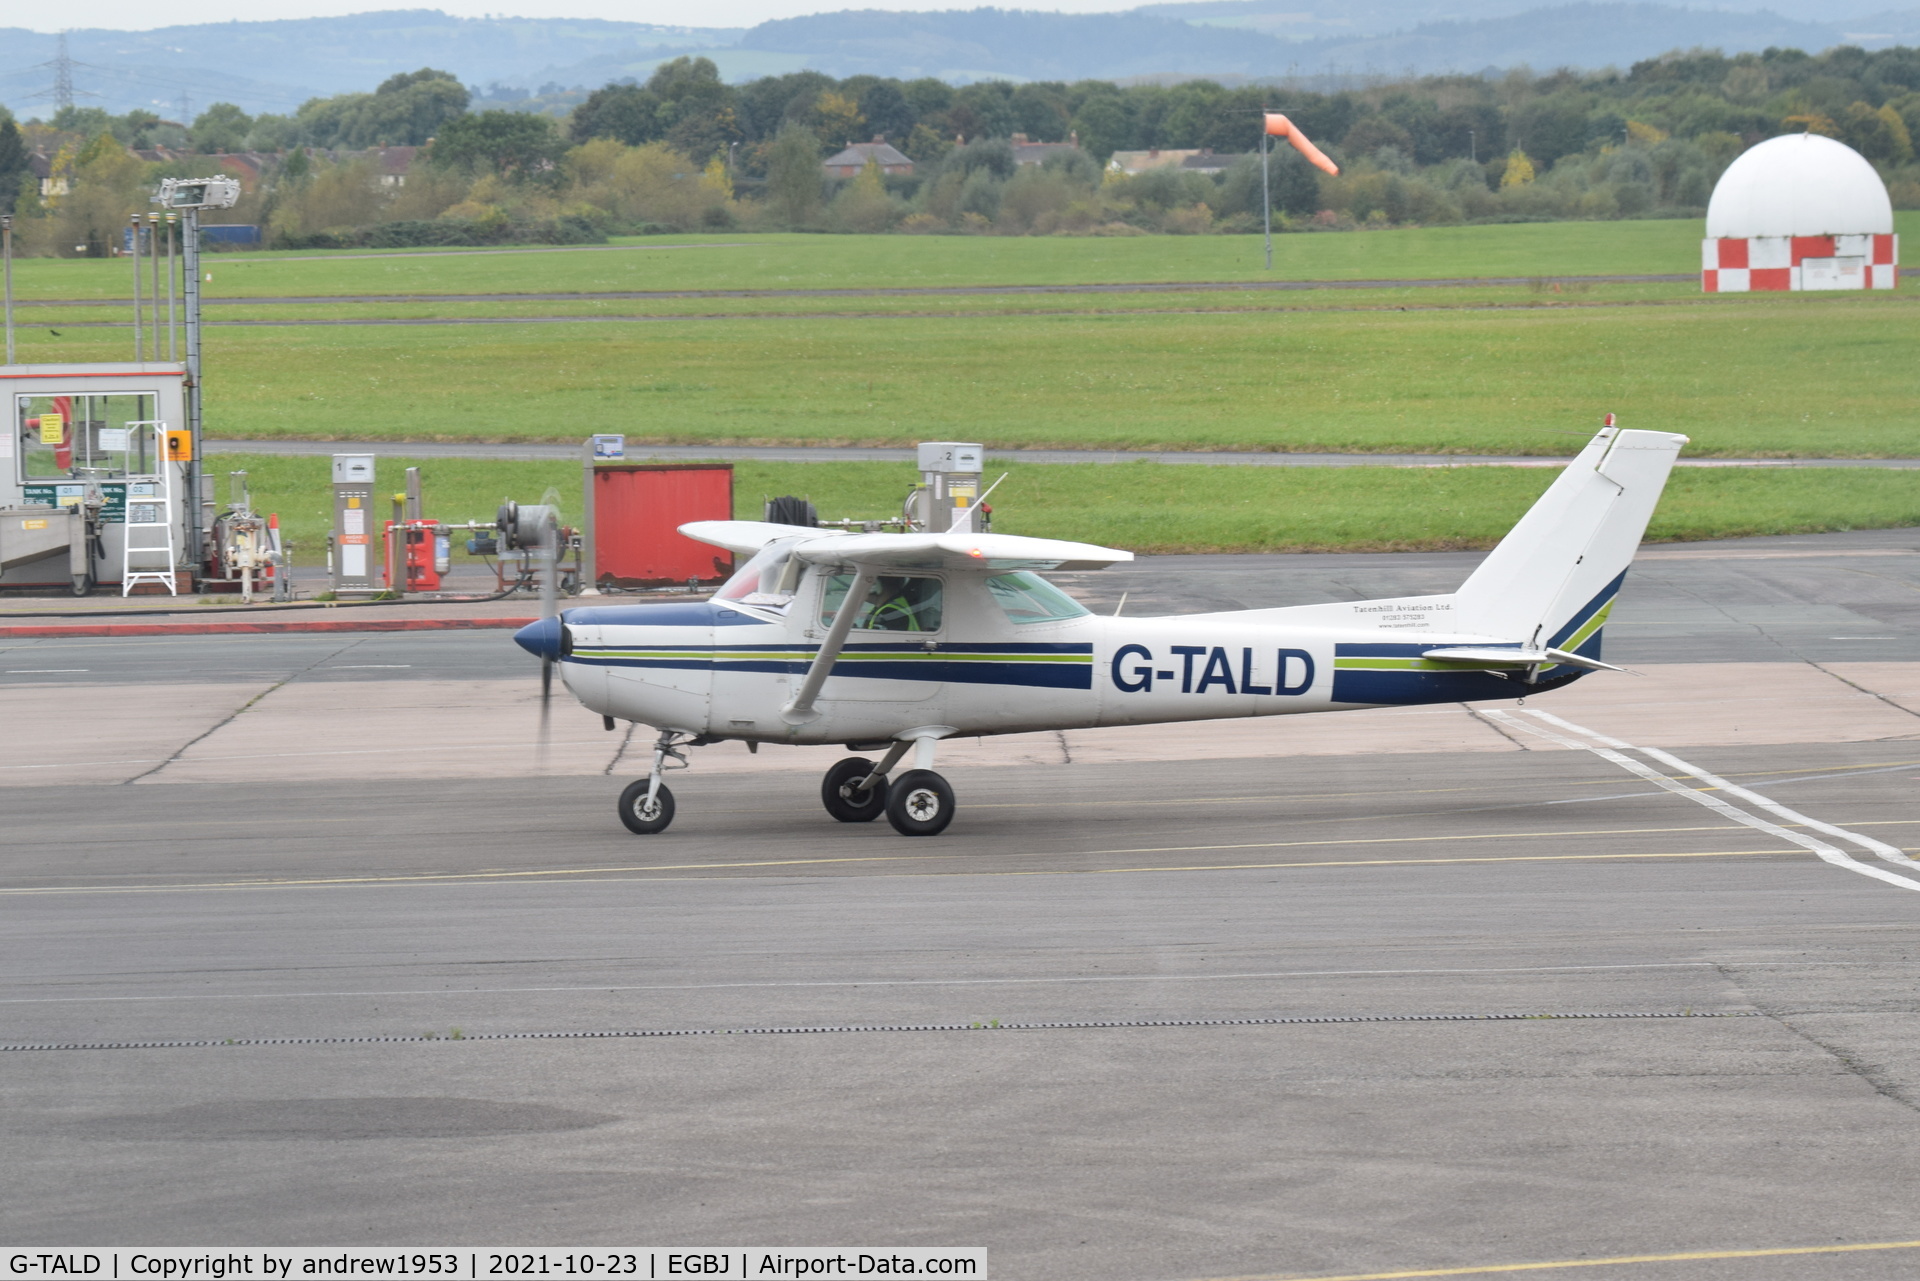 G-TALD, 1980 Reims F152 C/N 1718, G-TALD at Gloucestershire Airport.